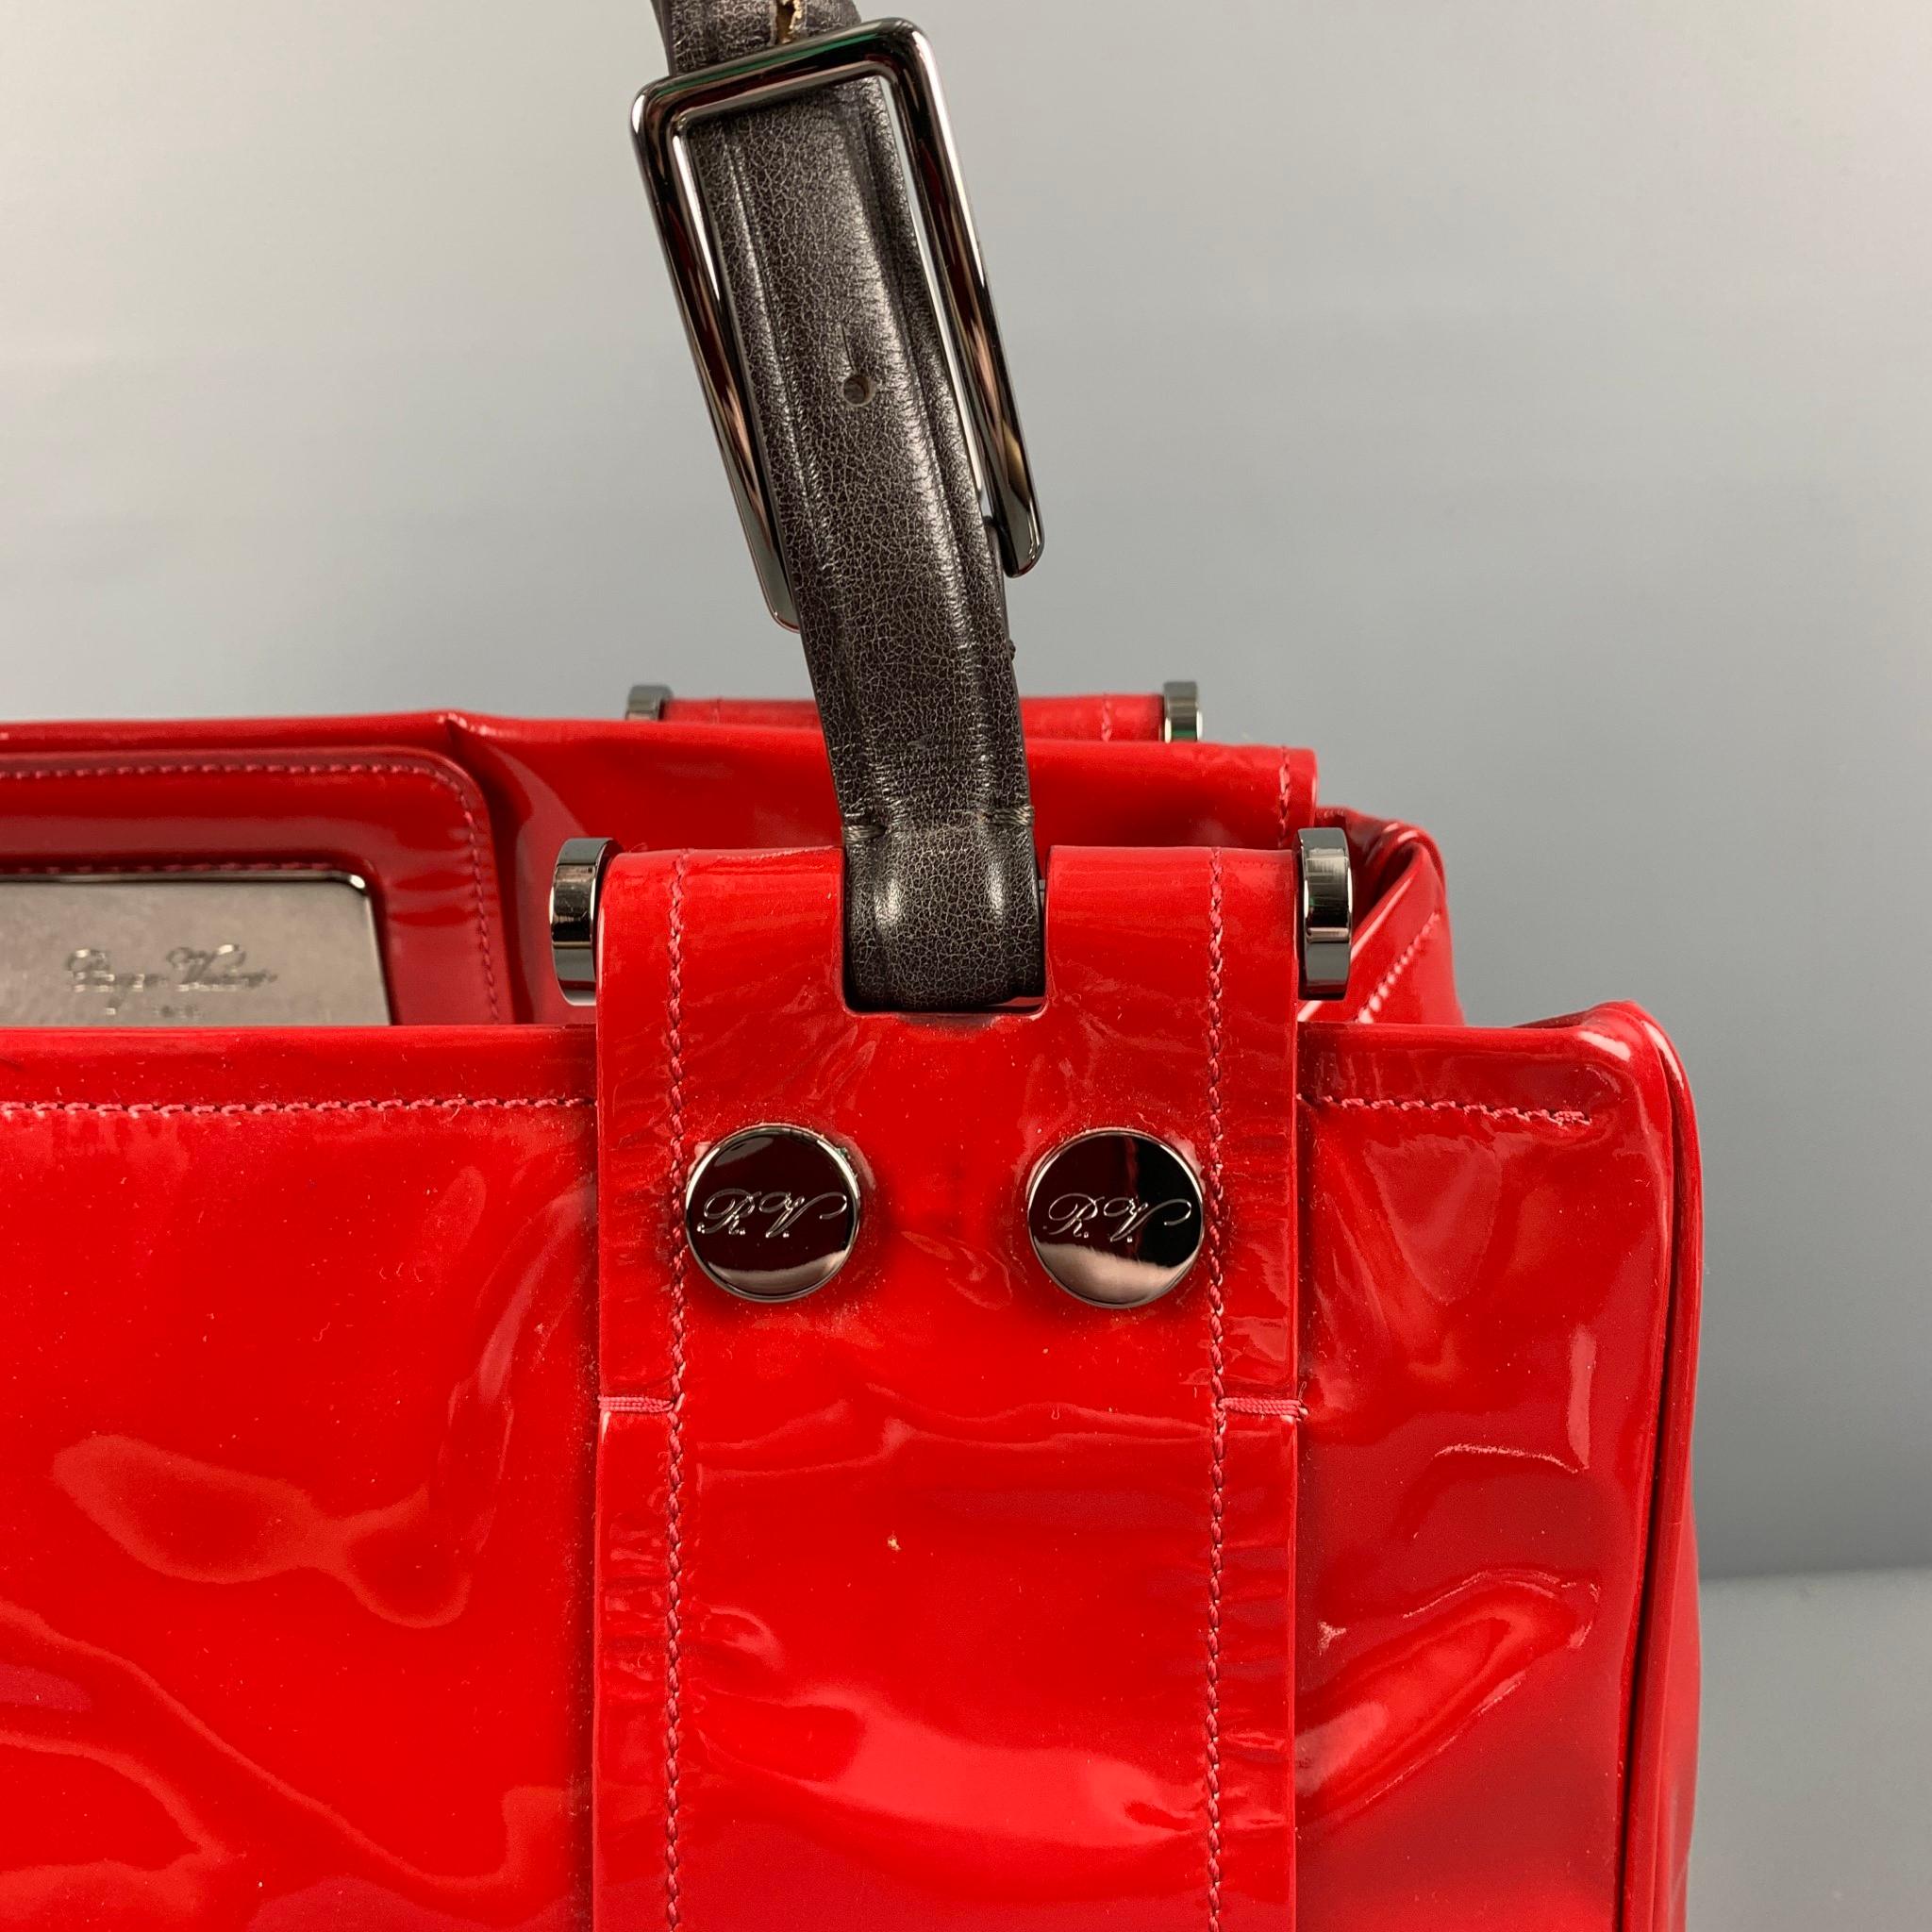 ROGER VIVIER bag comes in a red patent leather featuring brown leather straps, silver tone hardware, dual compartments, inner pockets, and a open top. 

Good Pre-Owned Condition. Moderate discoloration.

Measurements:

Length: 14.5 in.
Width: 4